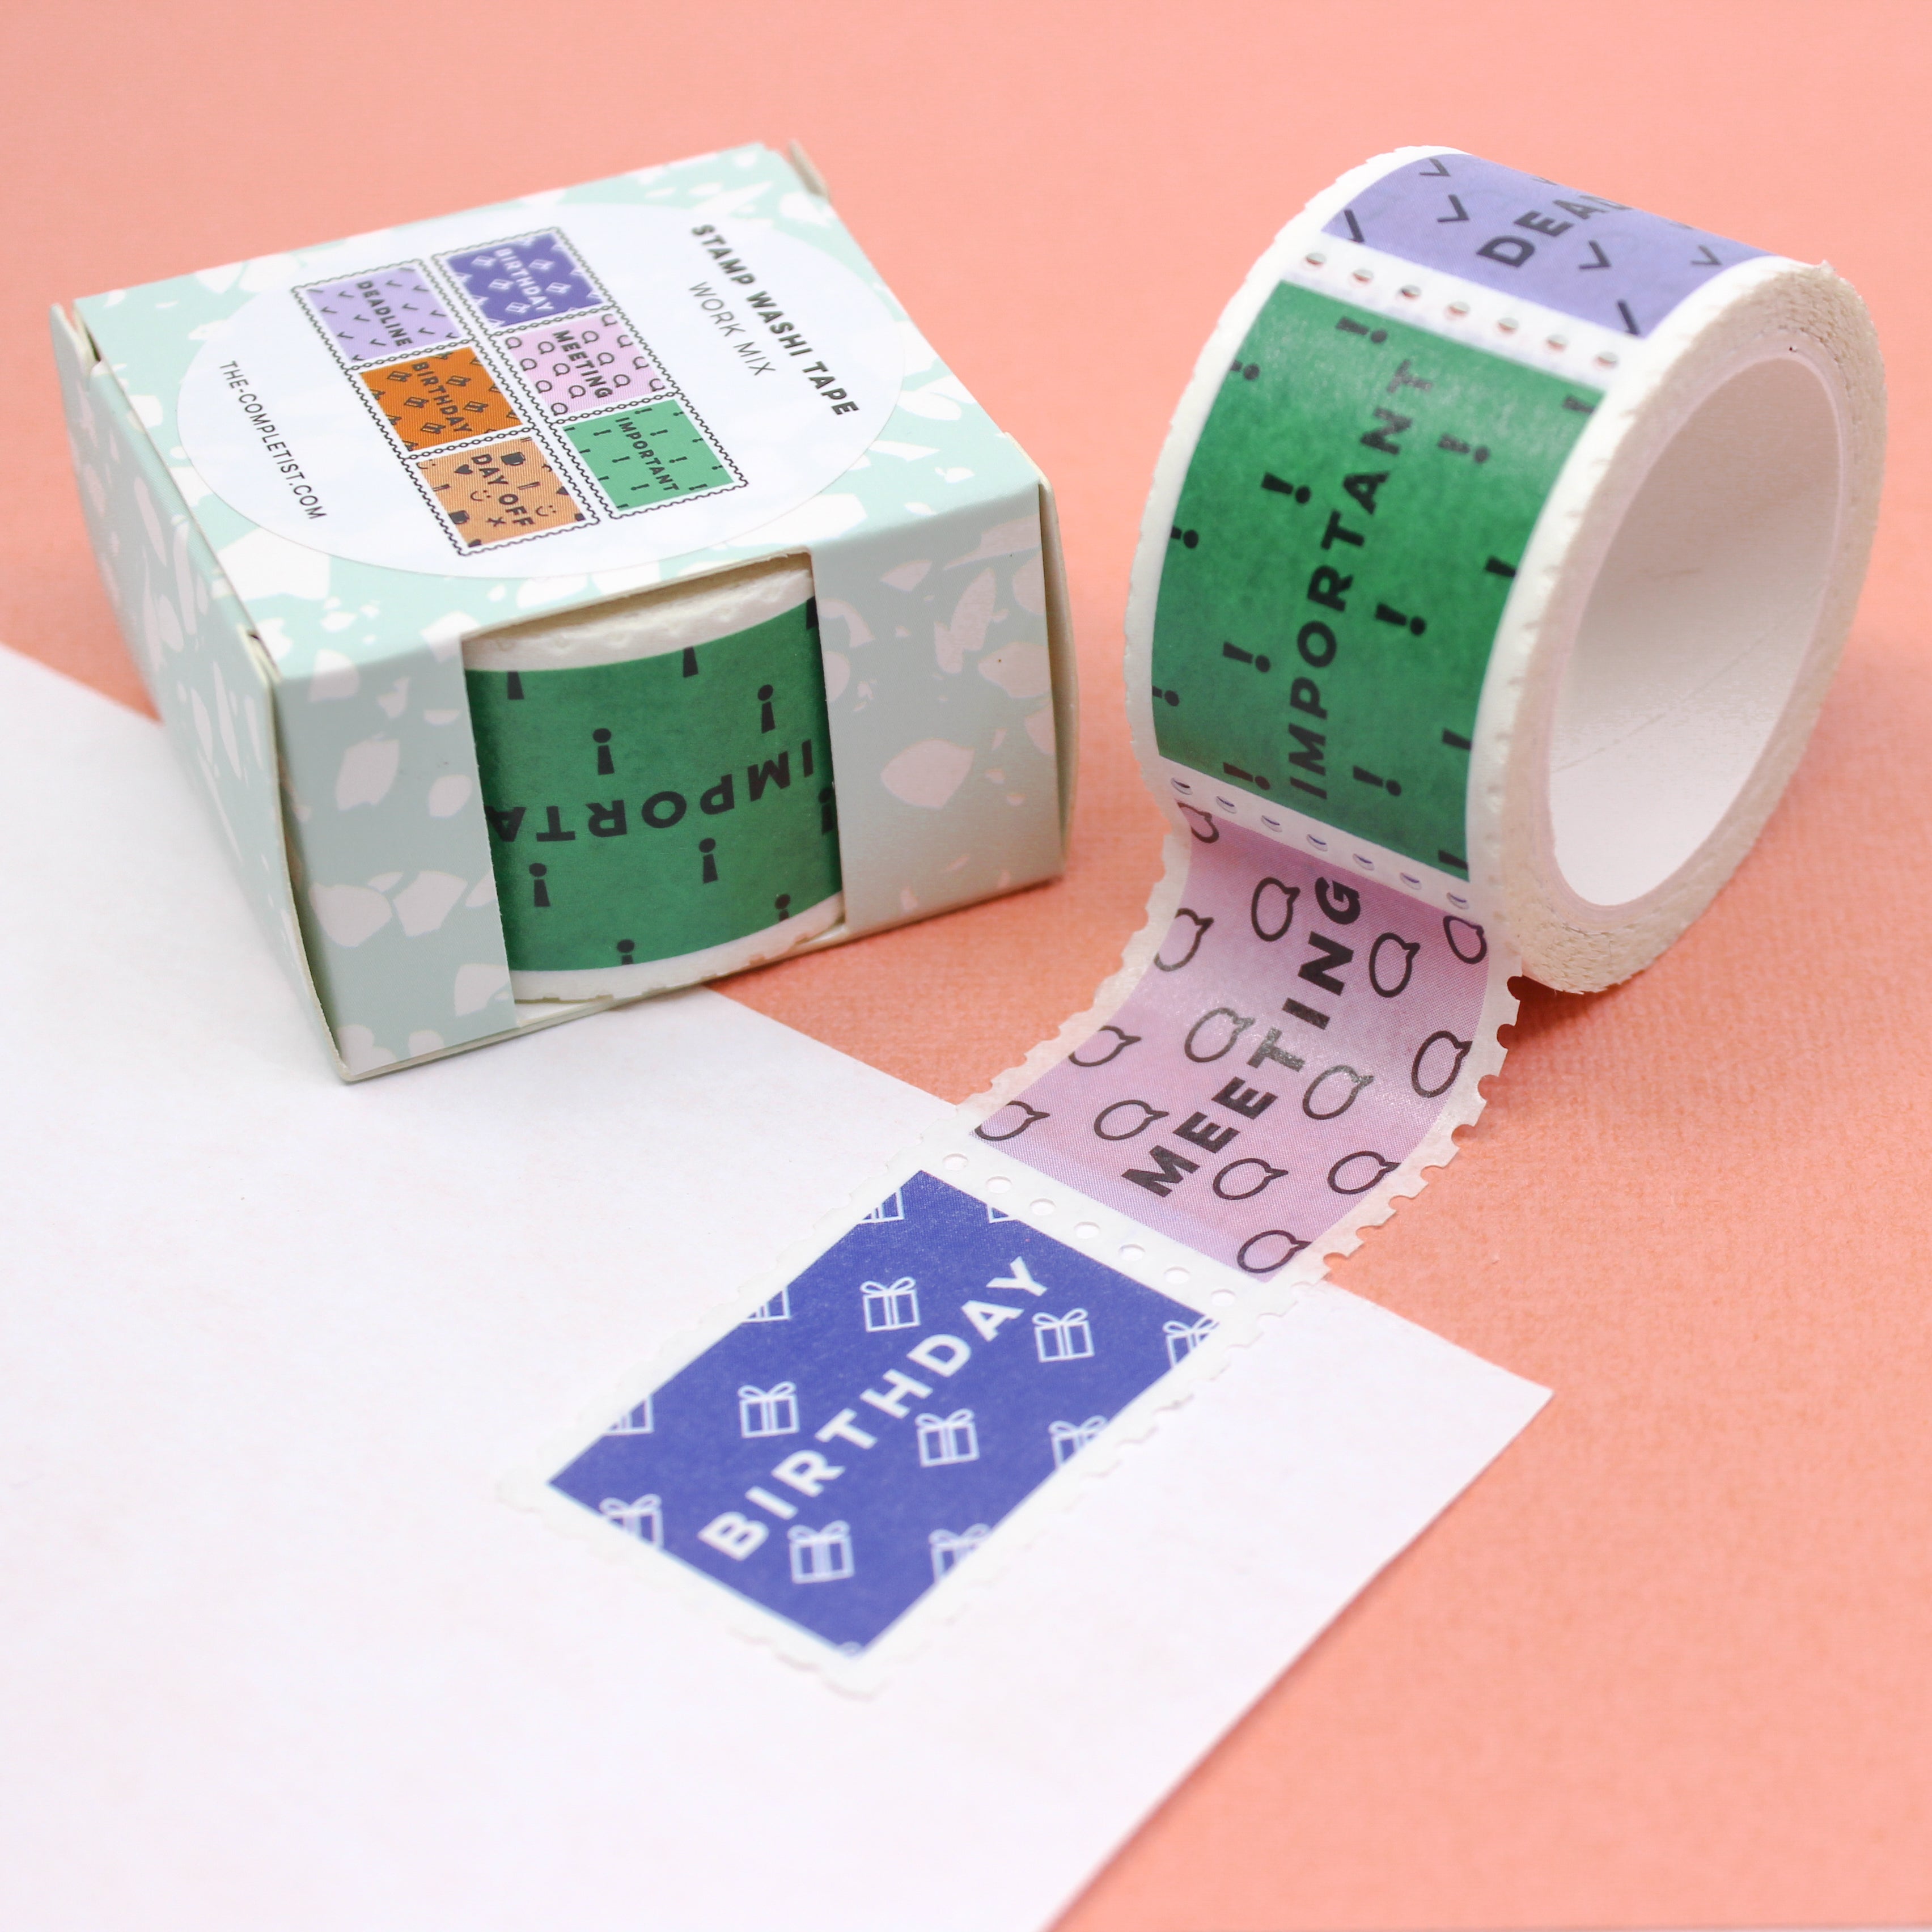 This is an work mix stamps pattern washi tape from BBB Supplies Craft Shop